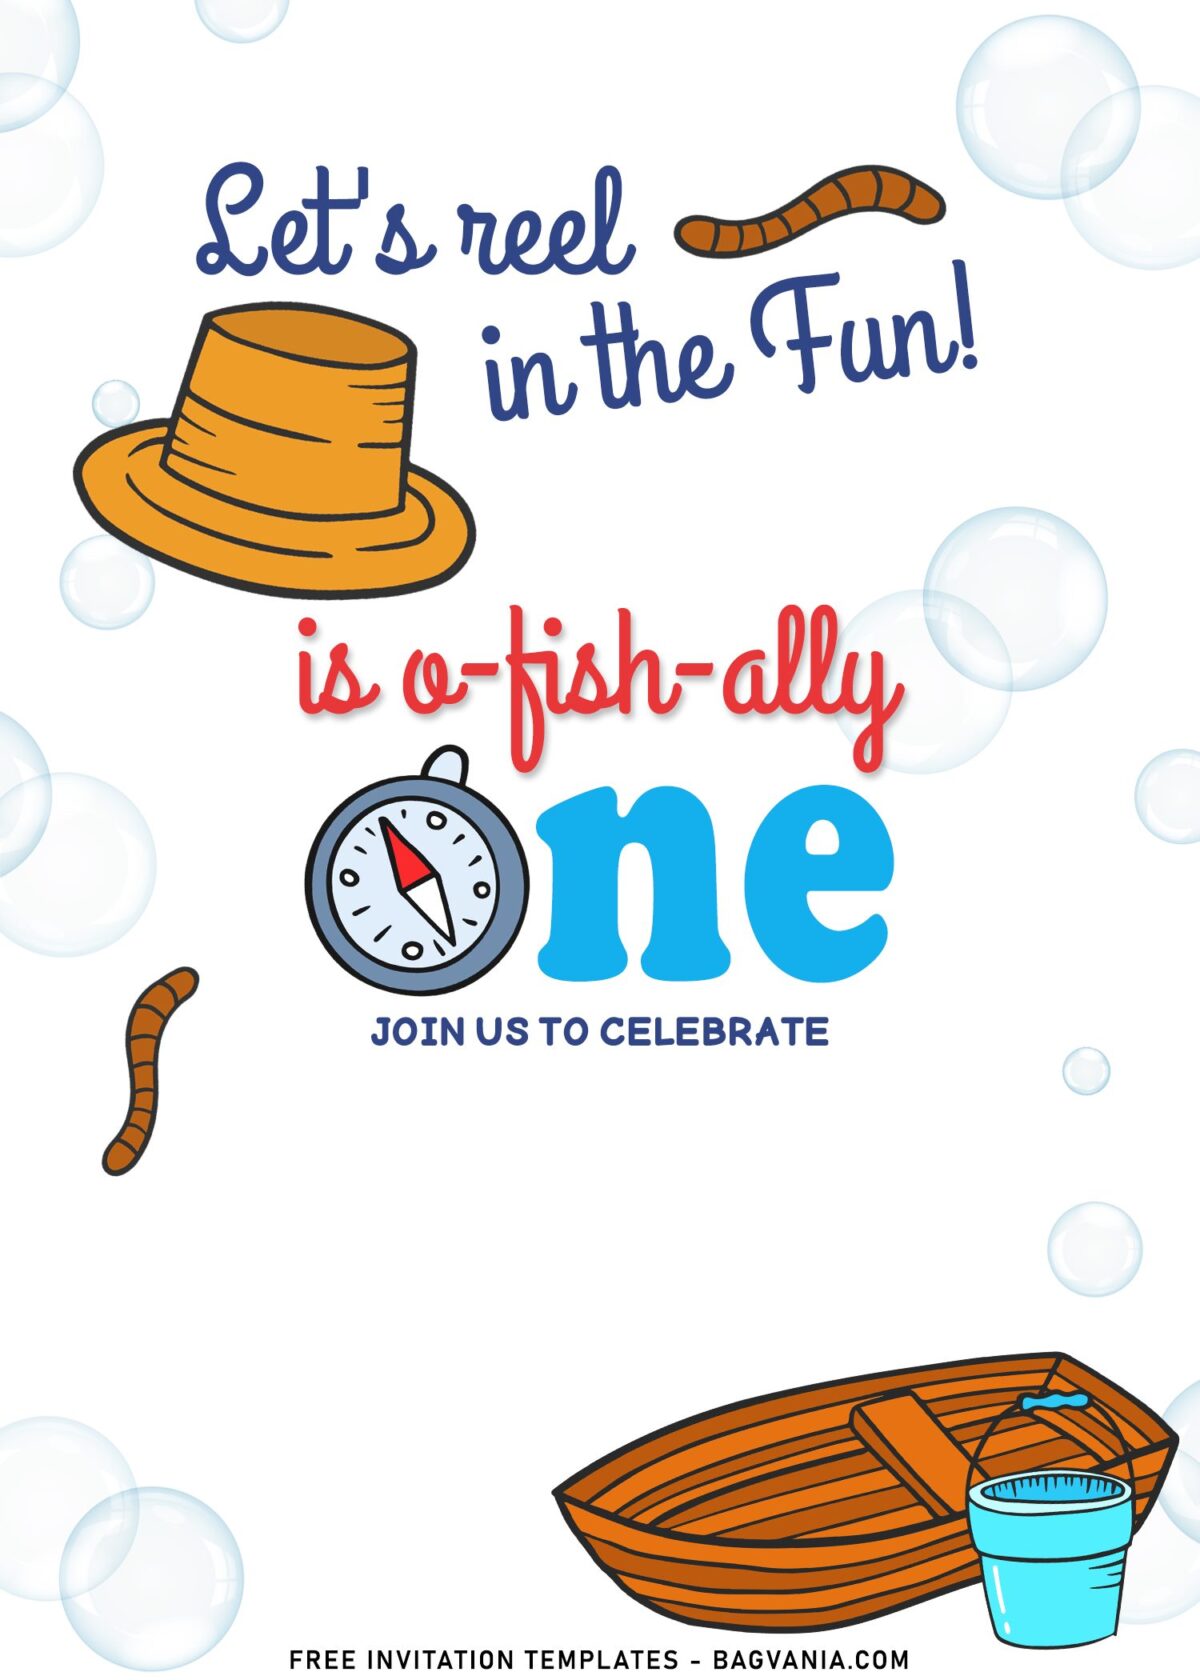 10+ Cute Fishing Birthday Invitation Templates For Your Little Fisherman with worm lure